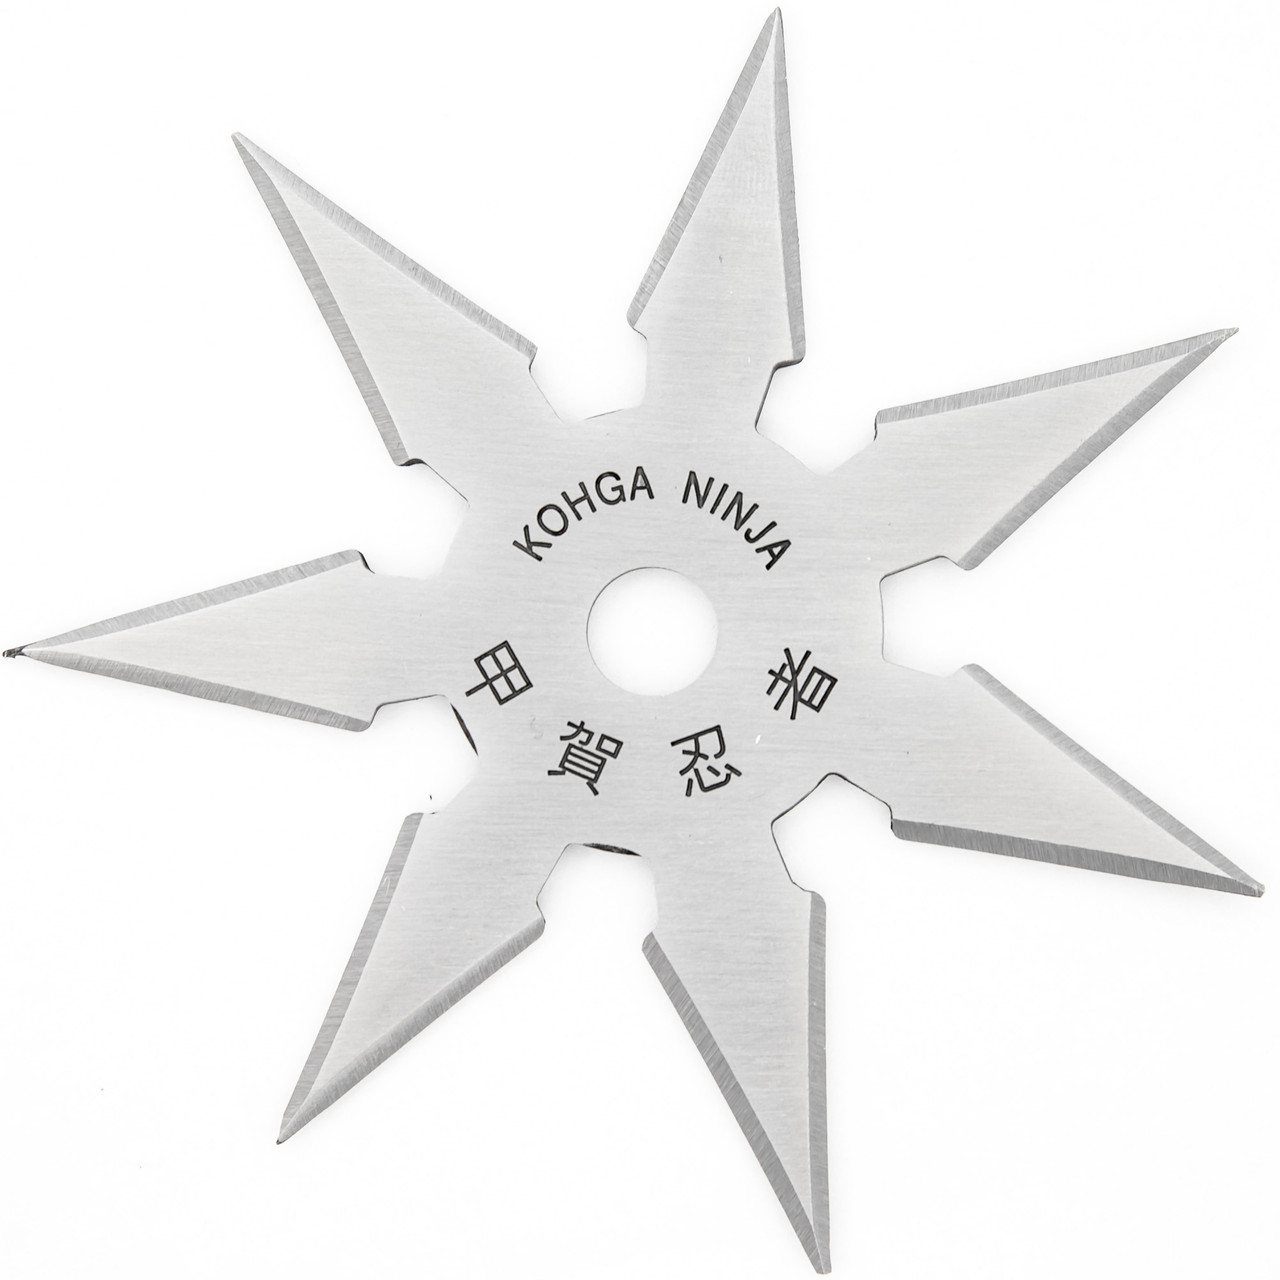 Ninja Throwing Star - 6 Points - Extra Thick with Heft